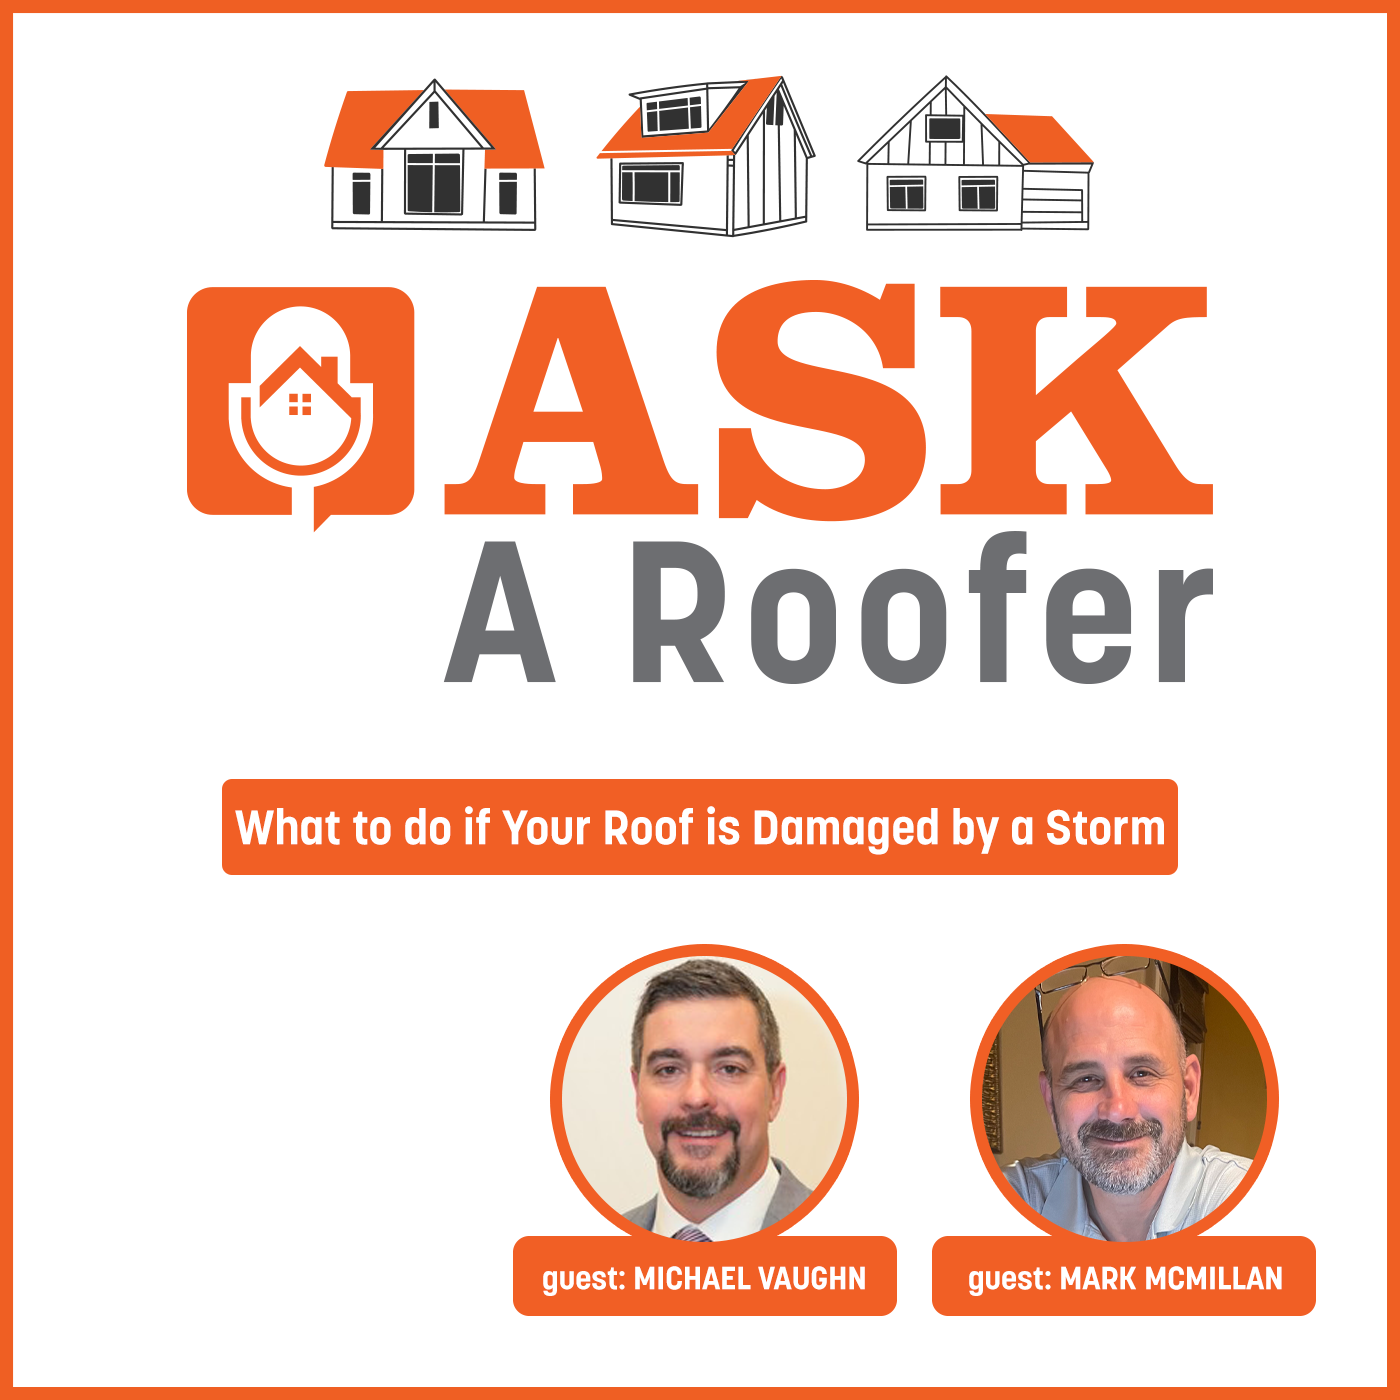 What to Do if Your Roof Is Damaged by a Storm with DaVinci Roof Scapes